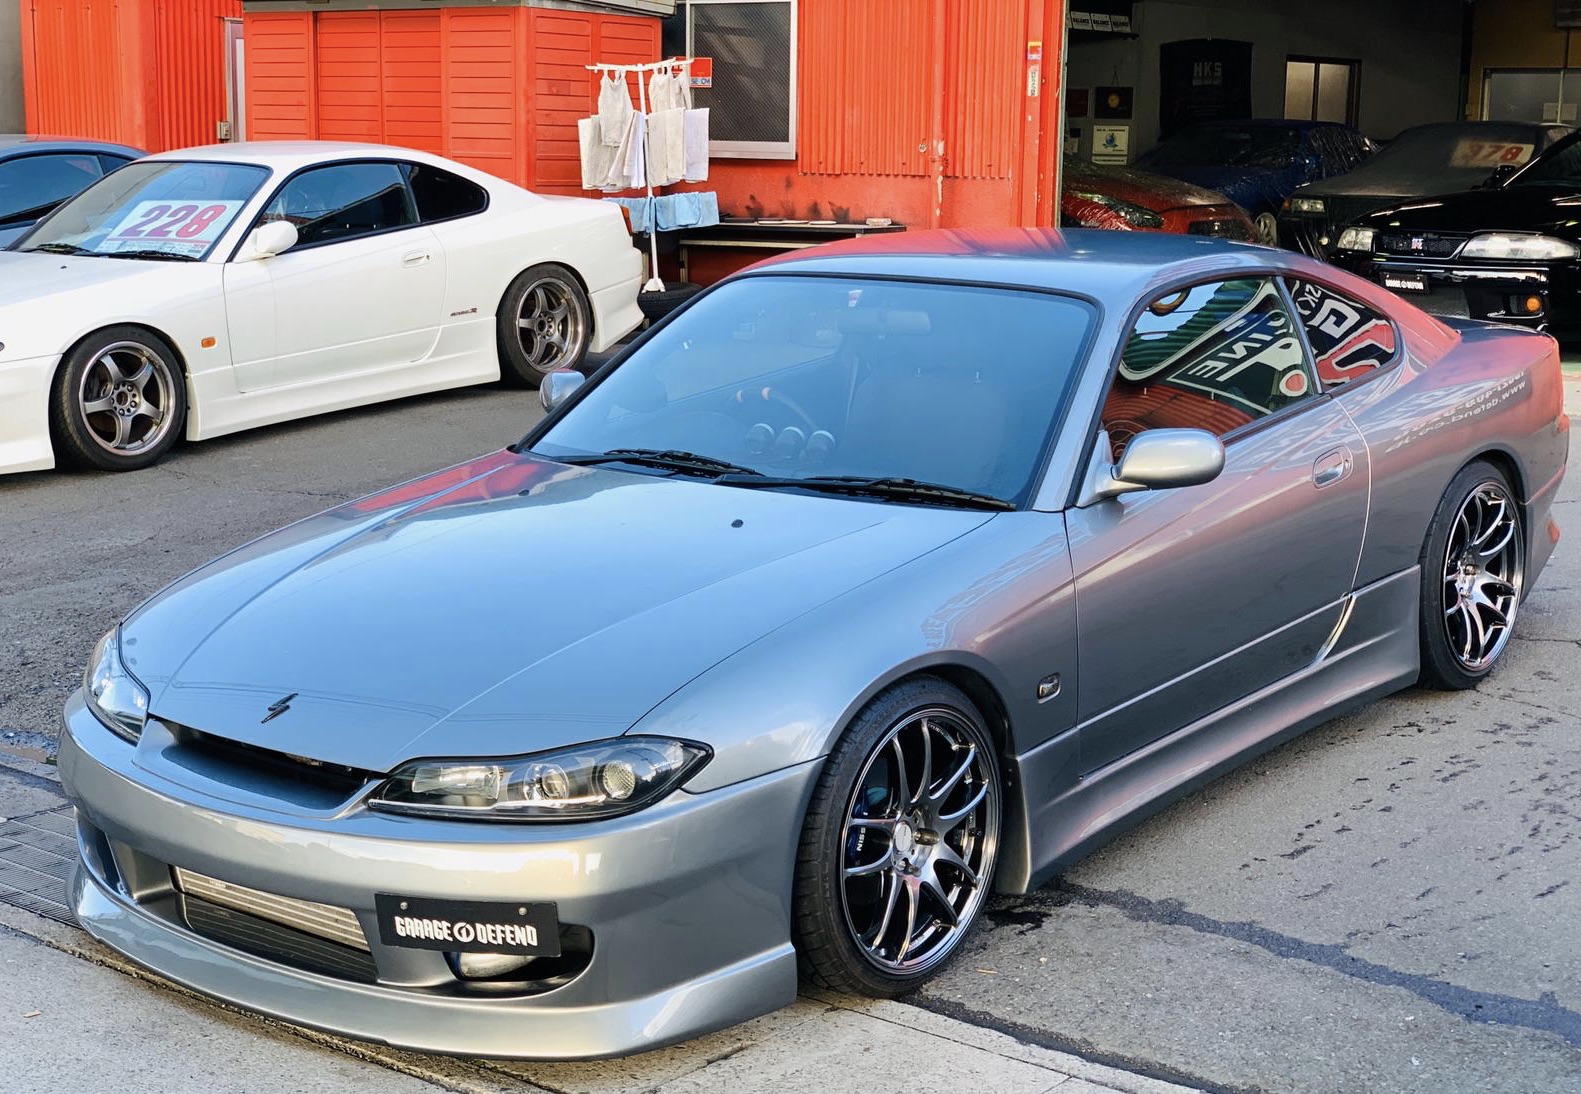 Nissan Silvia S15 For Sale - Photos All Recommendation